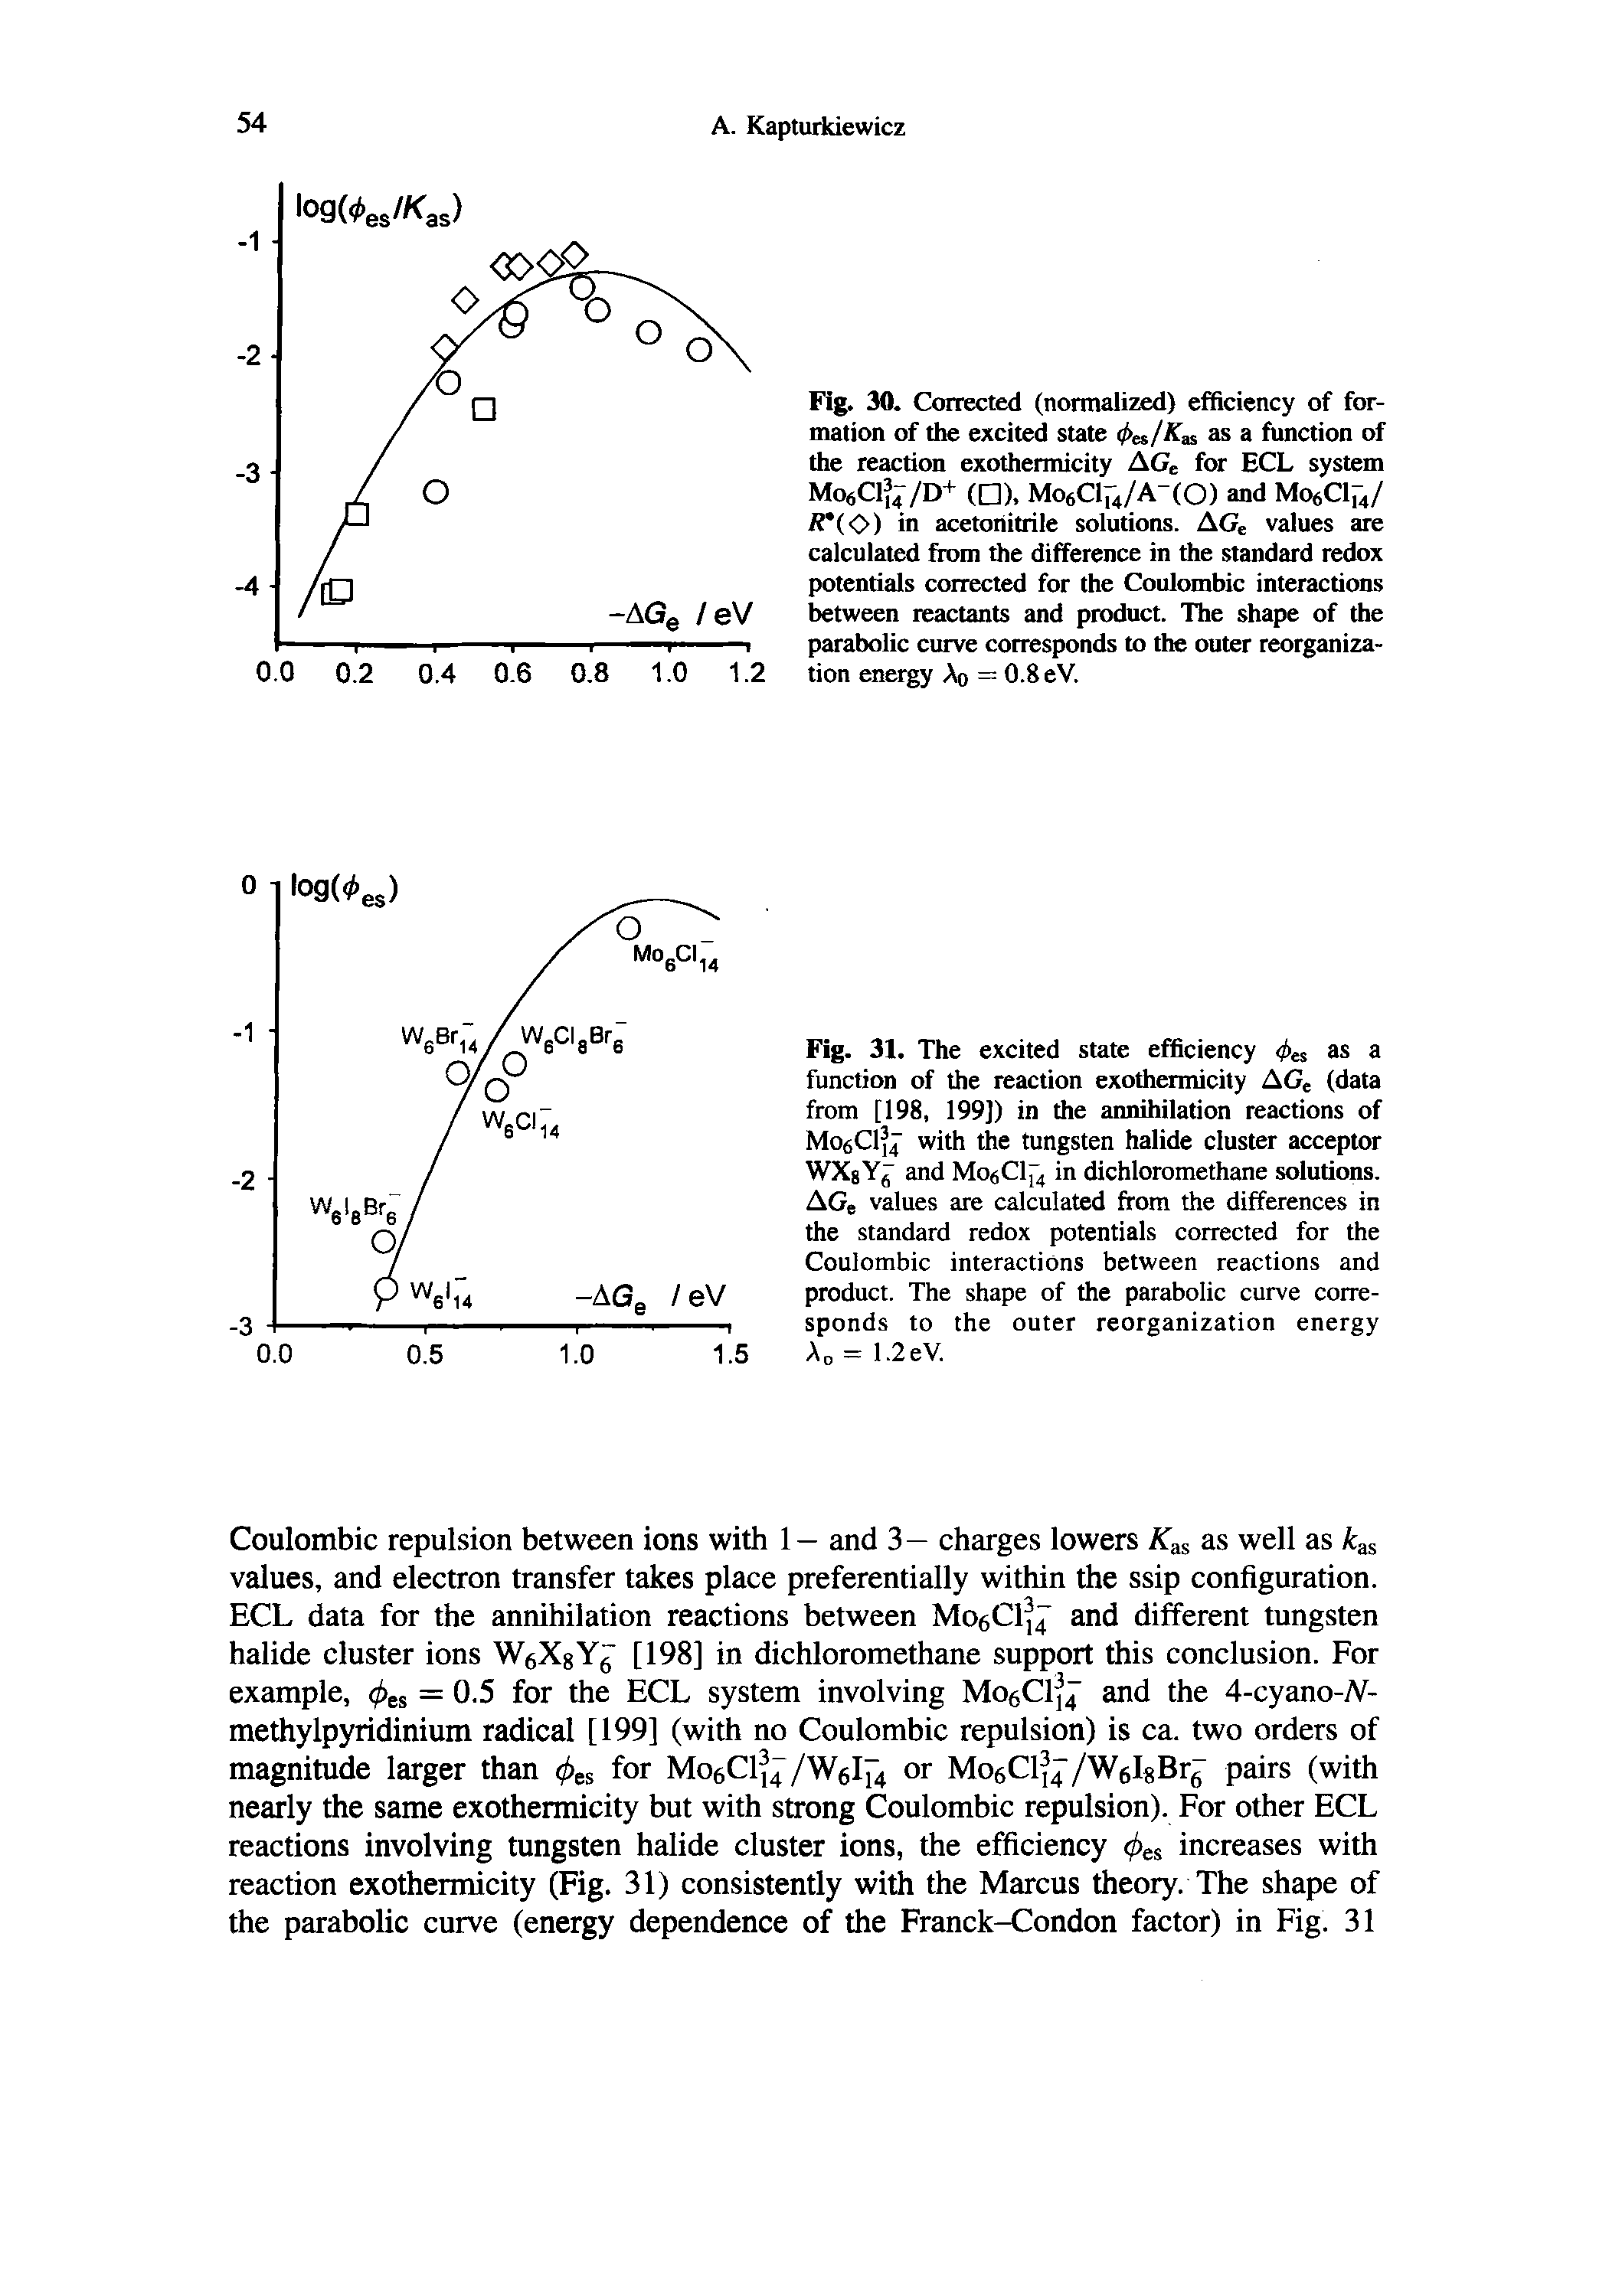 Fig. 31. The excited state efficiency 4es as a function of the reaction exothermicity AGe (data from [198, 199]) in the annihilation reactions of MoeClJj with the tungsten halide cluster acceptor WXgYj and Mo6Cl[ 4 in dichloromethane solutions. AGe values are calculated from the differences in the standard redox potentials corrected for the Coulombic interactions between reactions and product. The shape of the parabolic curve corresponds to the outer reorganization energy An = 1.2eV.